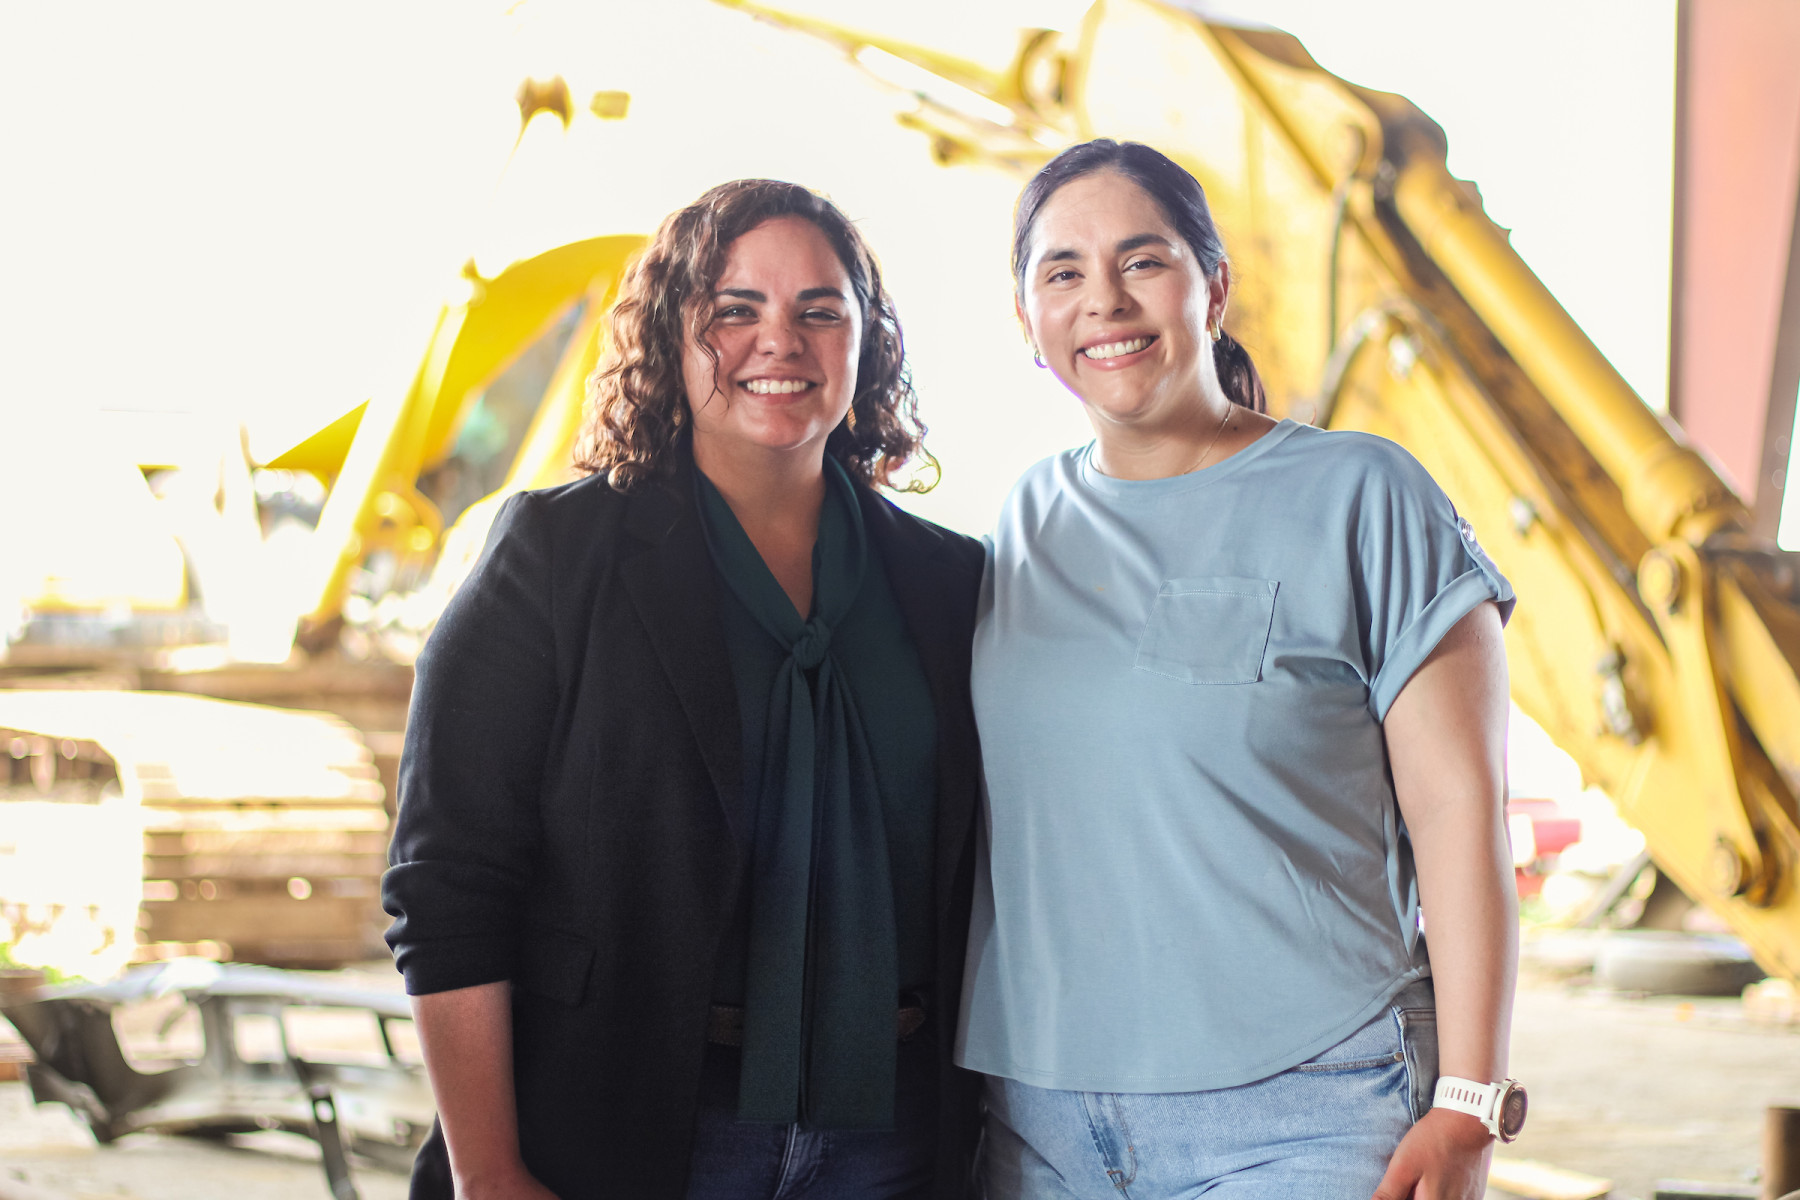 Local sisters boost business through STC apprenticeship